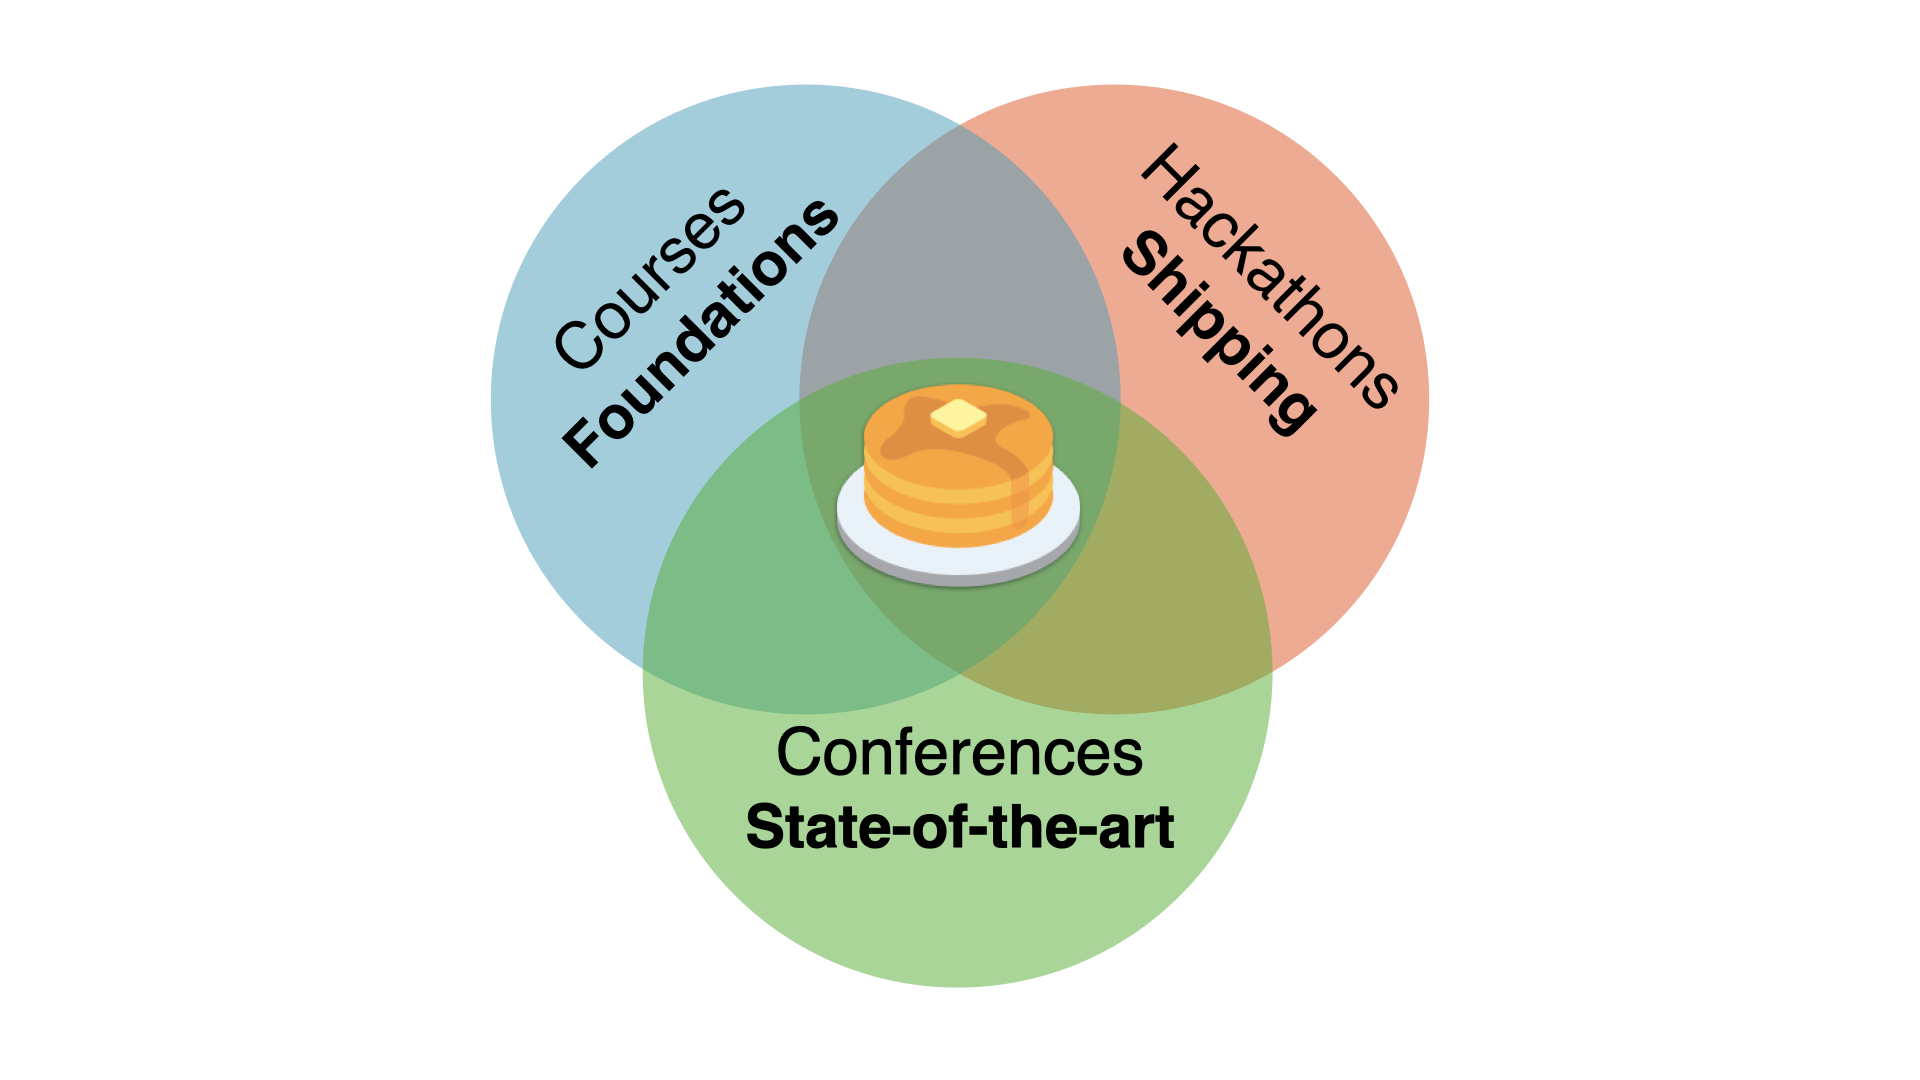 Venn diagram showing that FSDL is at the intersection of a course, a hackathon, and a conference.